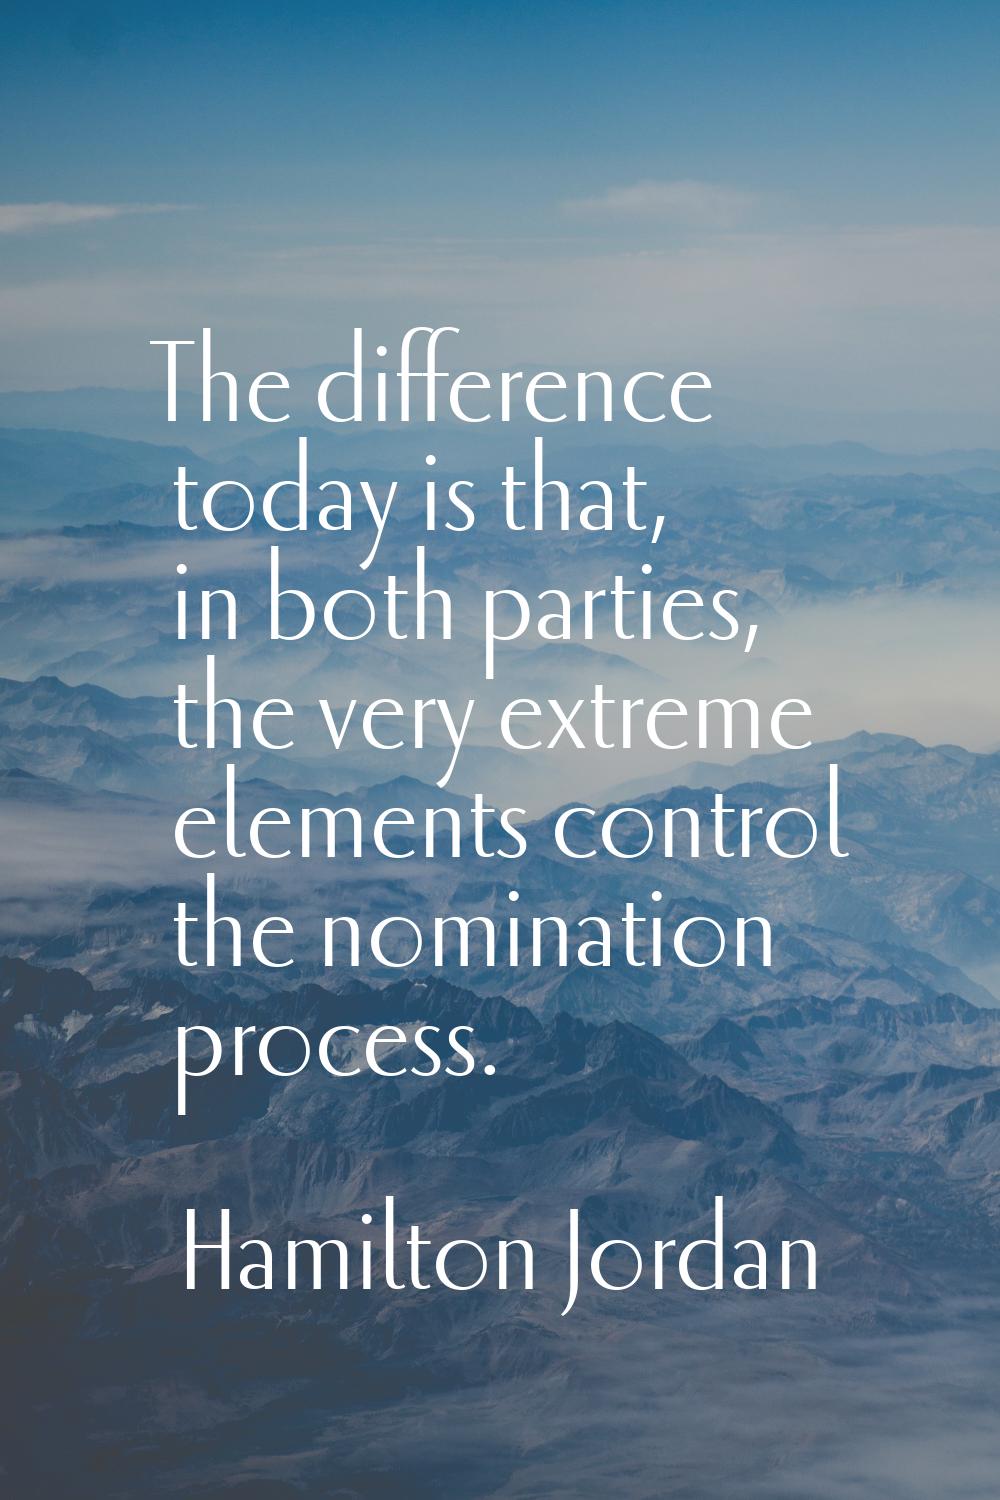 The difference today is that, in both parties, the very extreme elements control the nomination pro